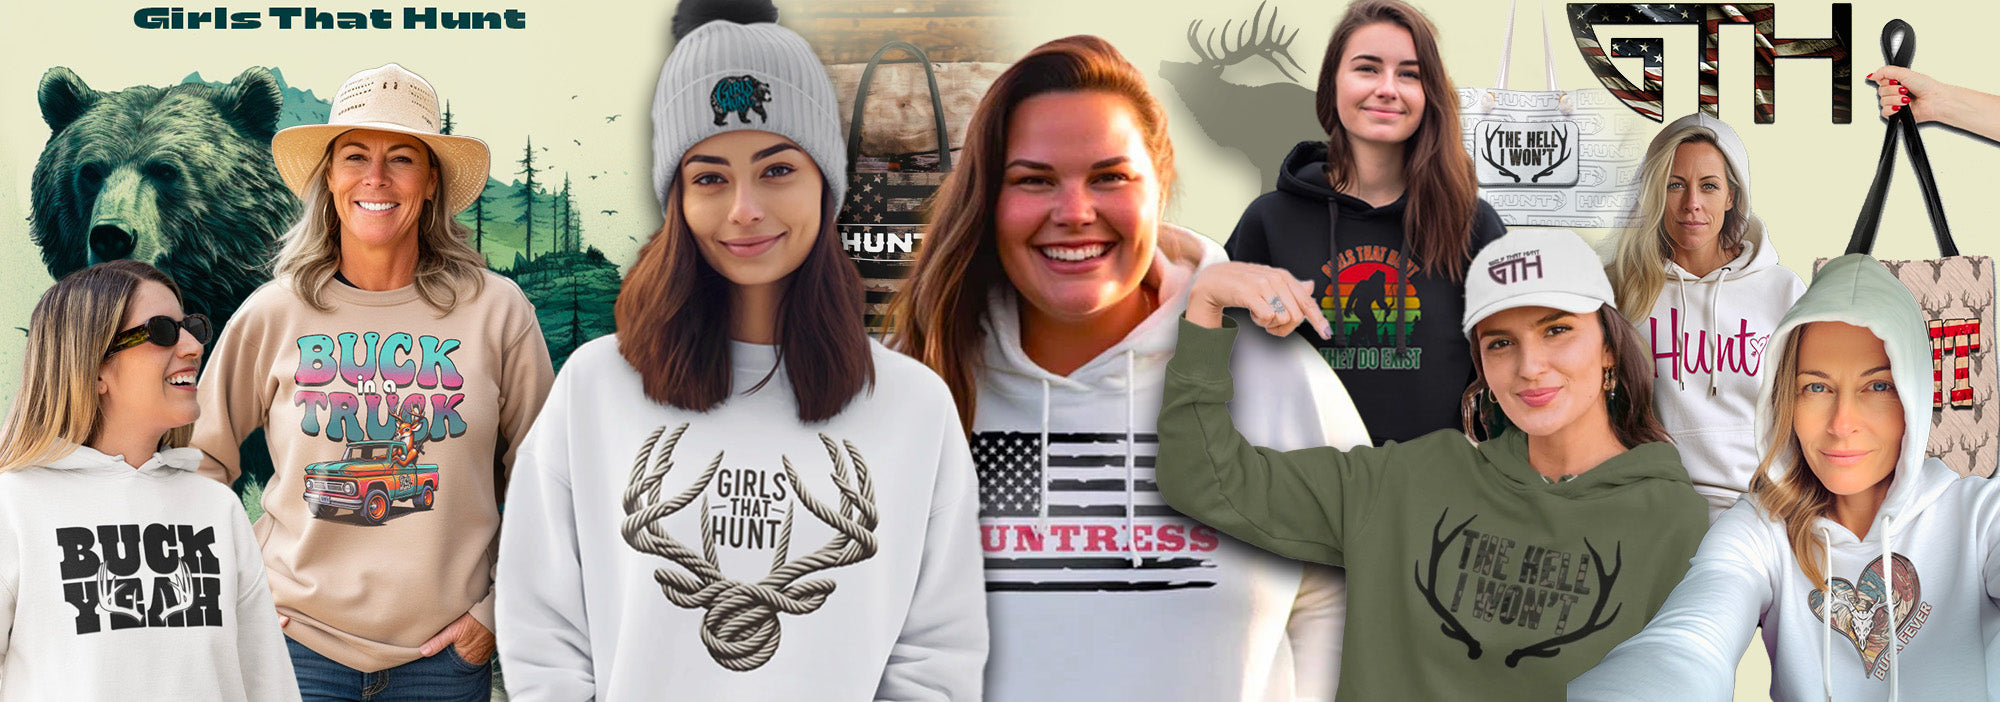 Girls That Hunt: Fun Hunting-Inspired Apparel for Outdoor Women